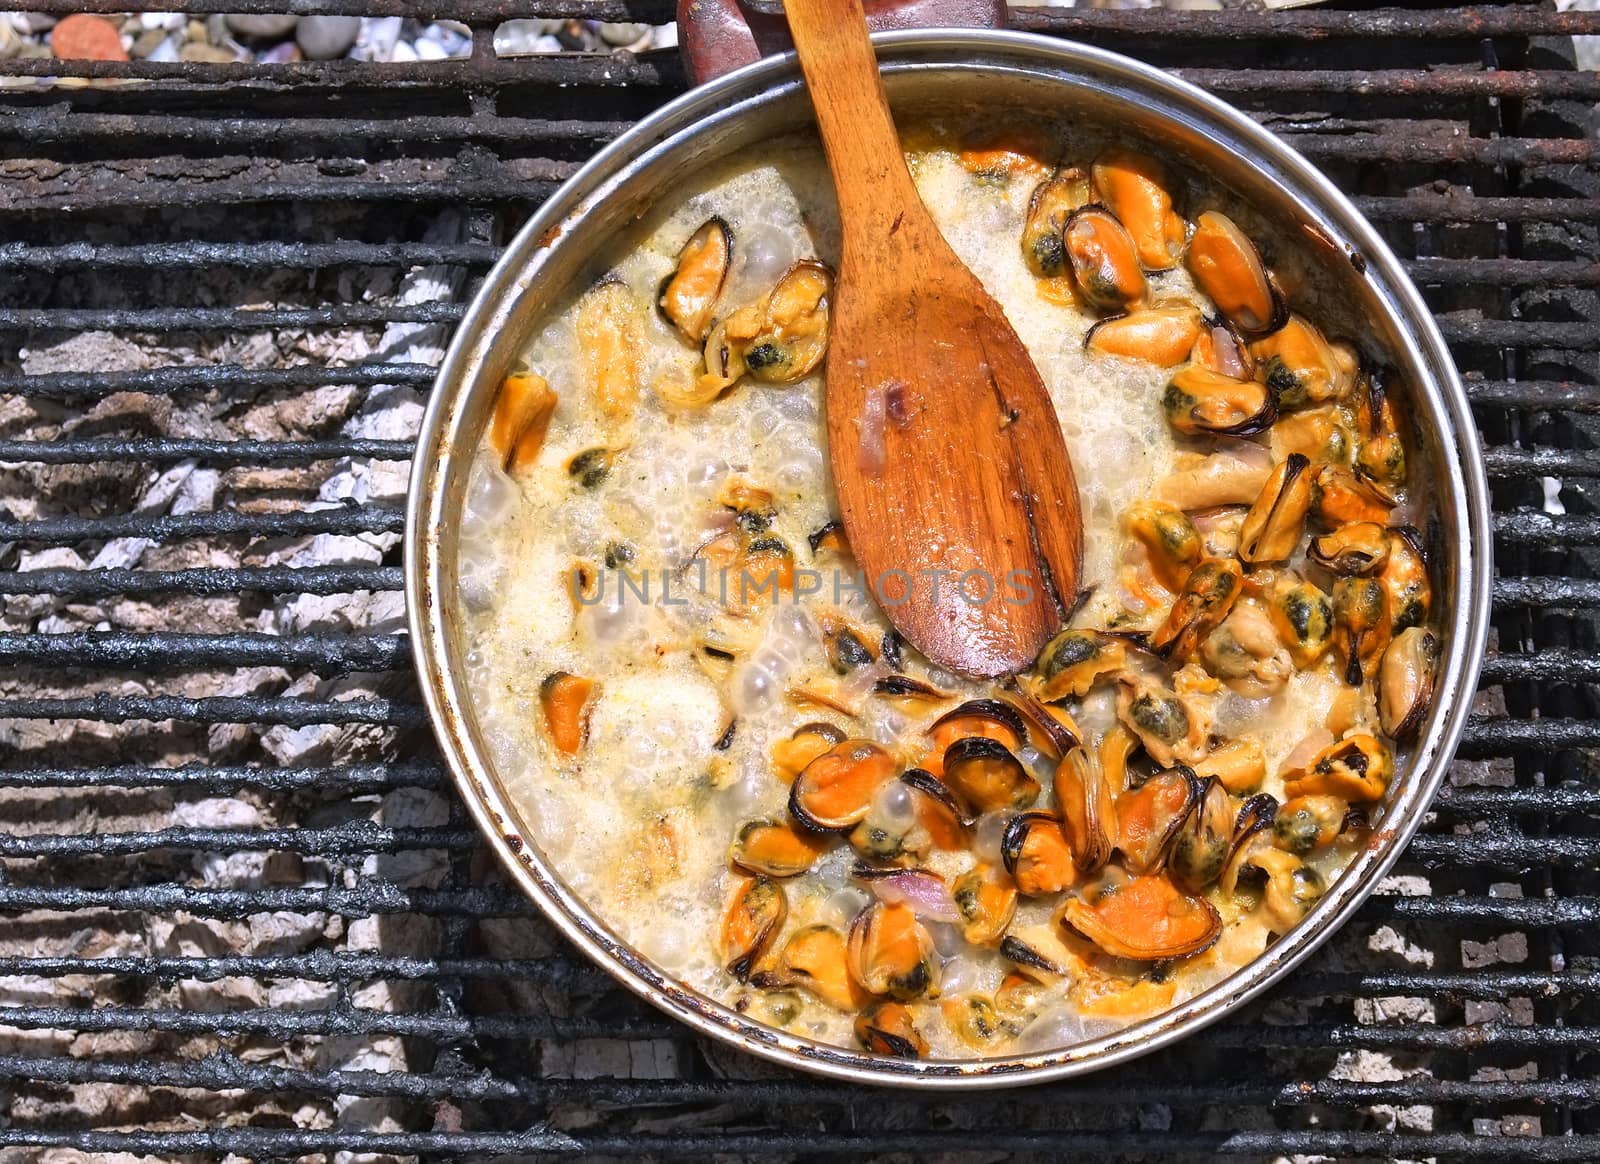 Purified from the shells of sea mussels simmer in a creamy sauce over an open fire outdoors.